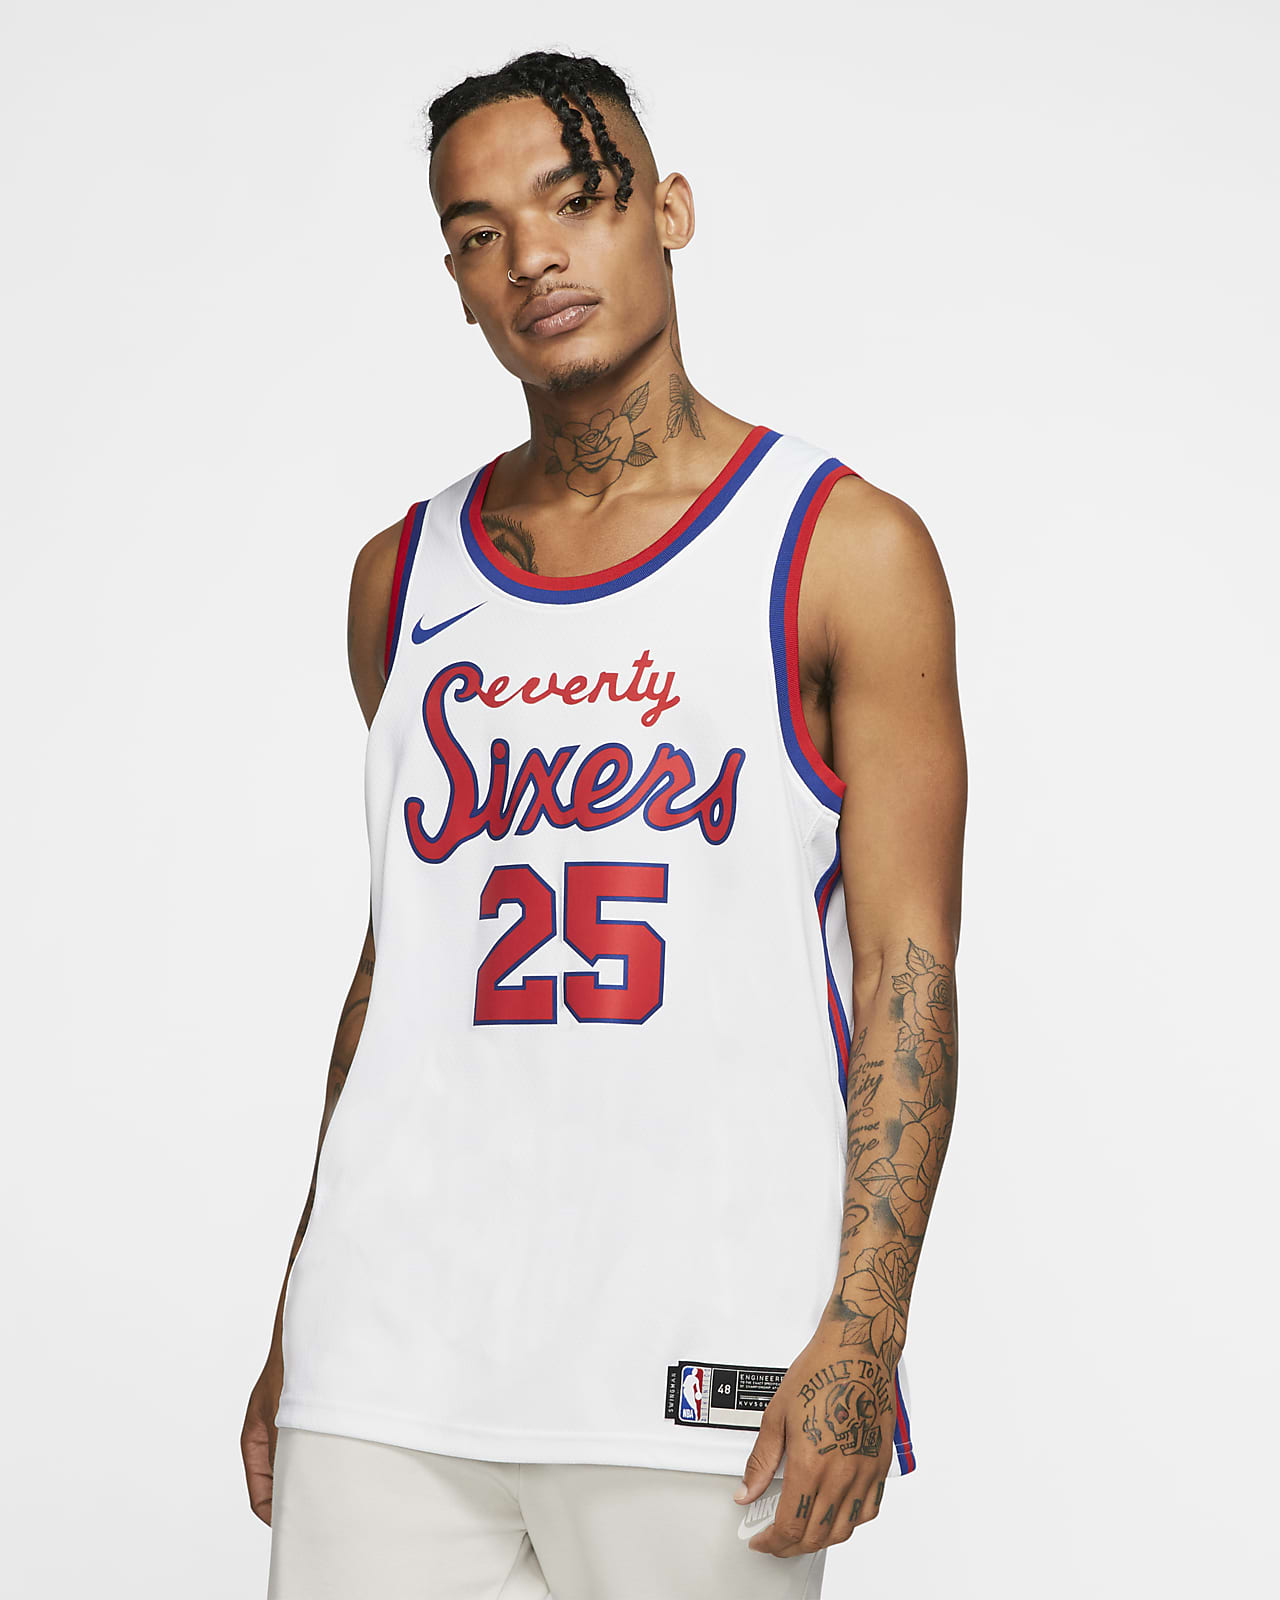 sixers jersey simmons